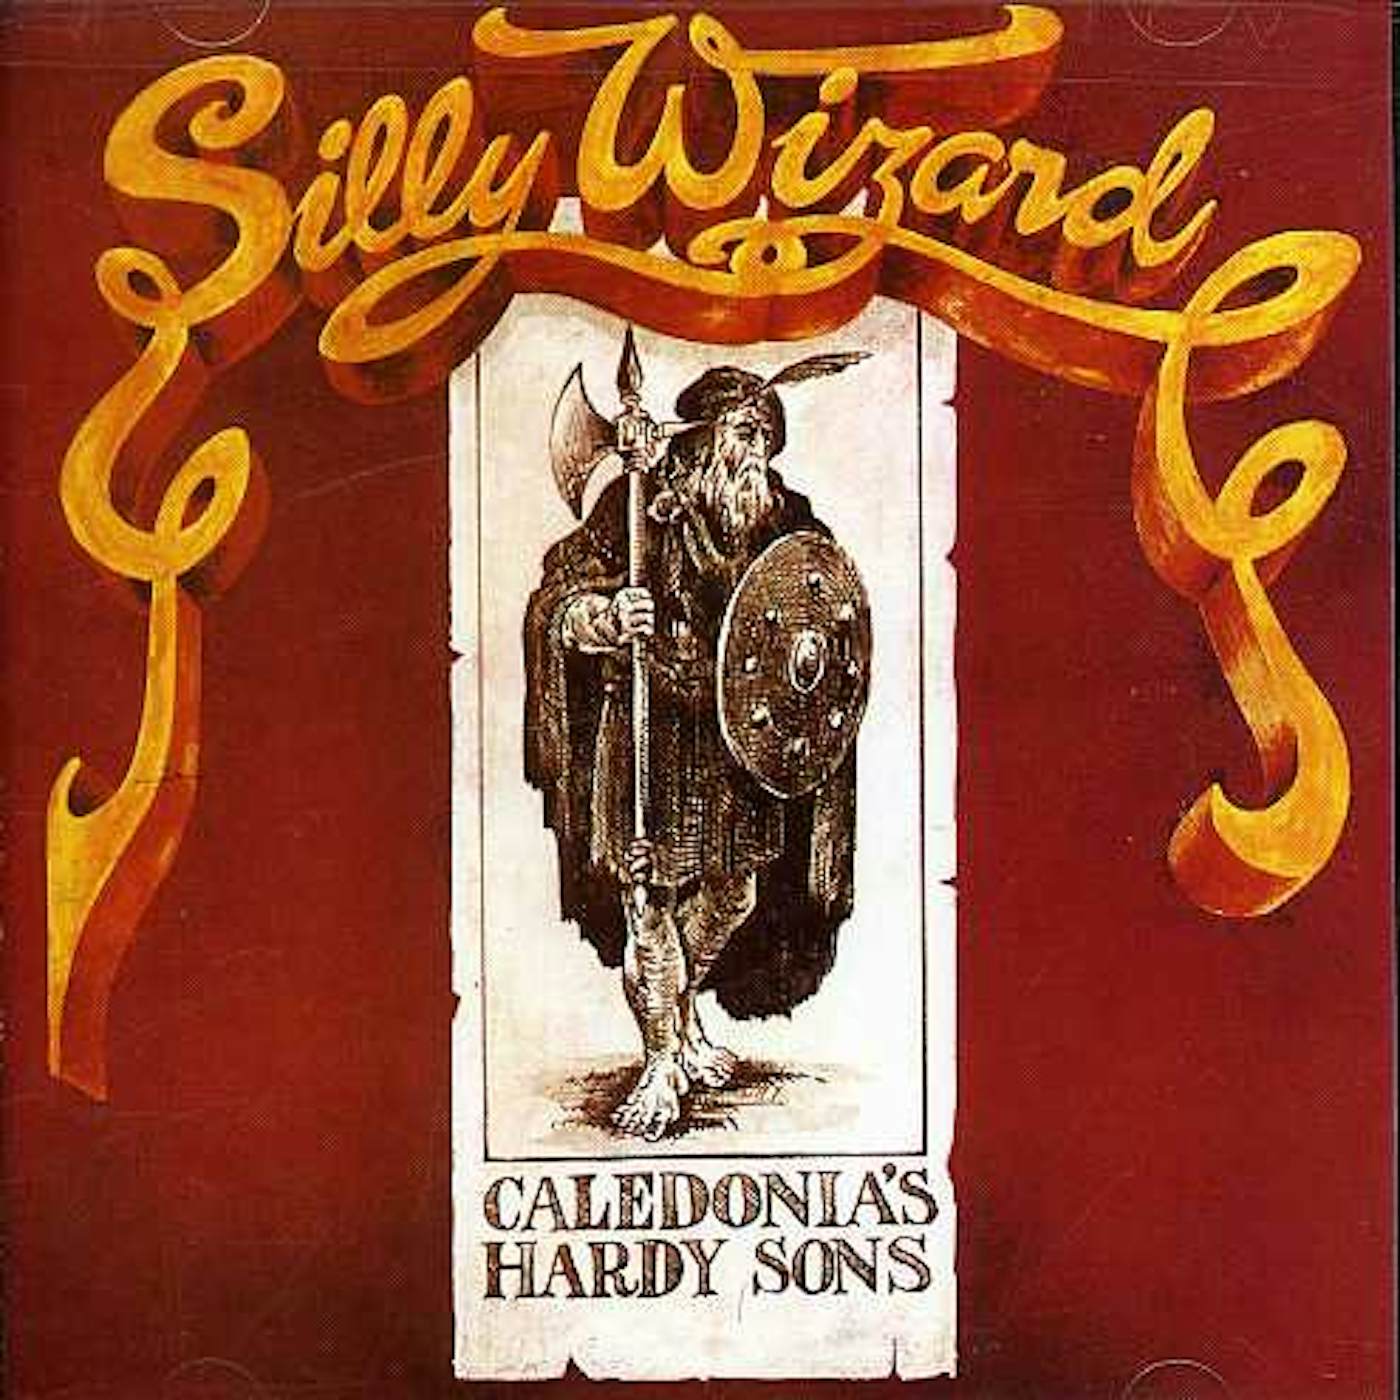 Silly Wizard CALEDONIAS HARDY SONS CD